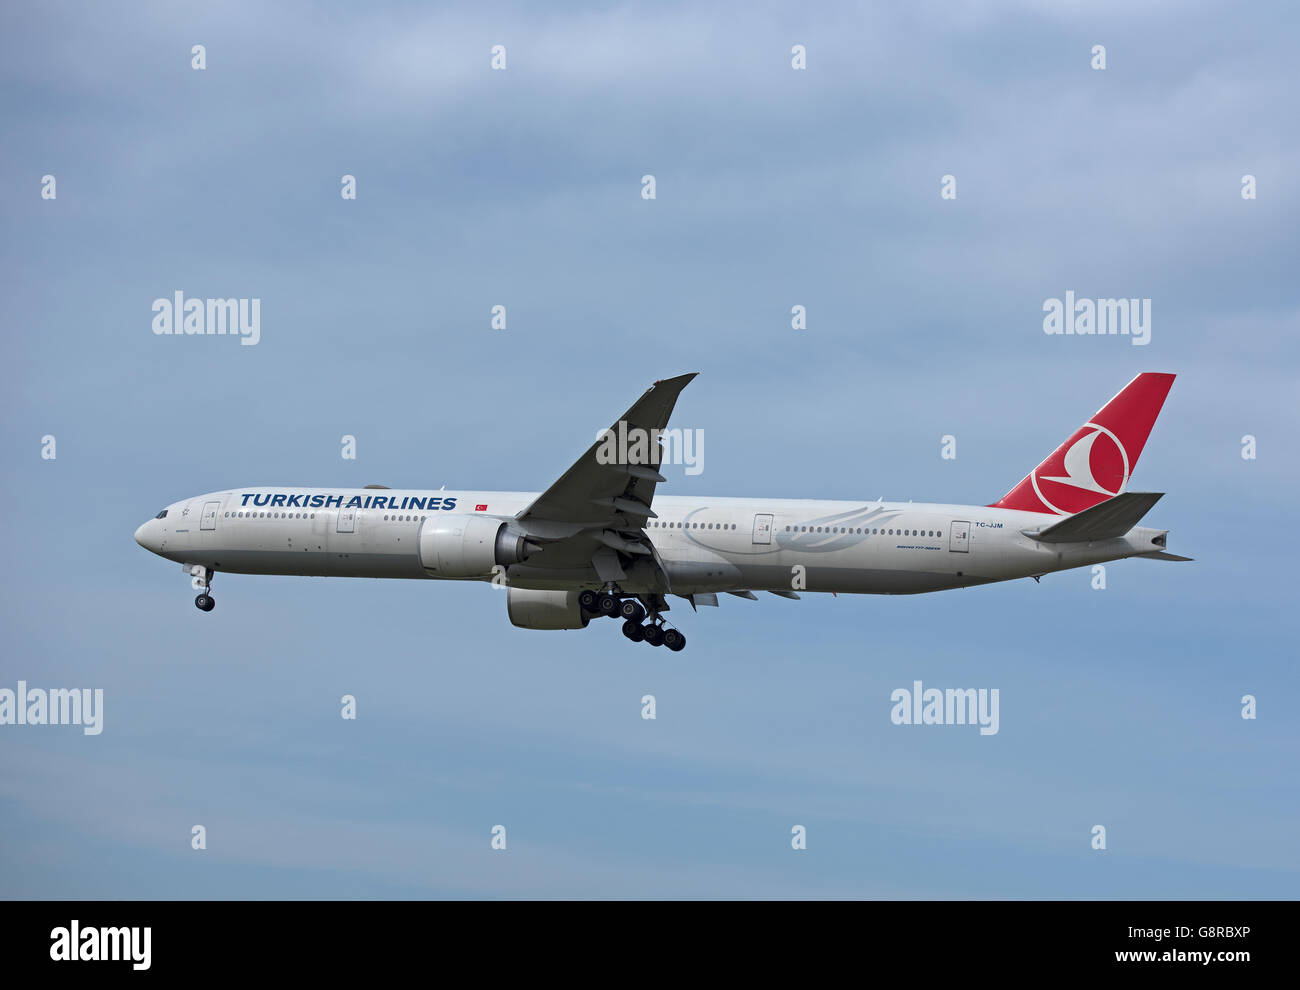 Turkish Airlines Airbus 321-231 (Uludag) about to land at London Heathrow Airport.  SCO 10,481. Stock Photo